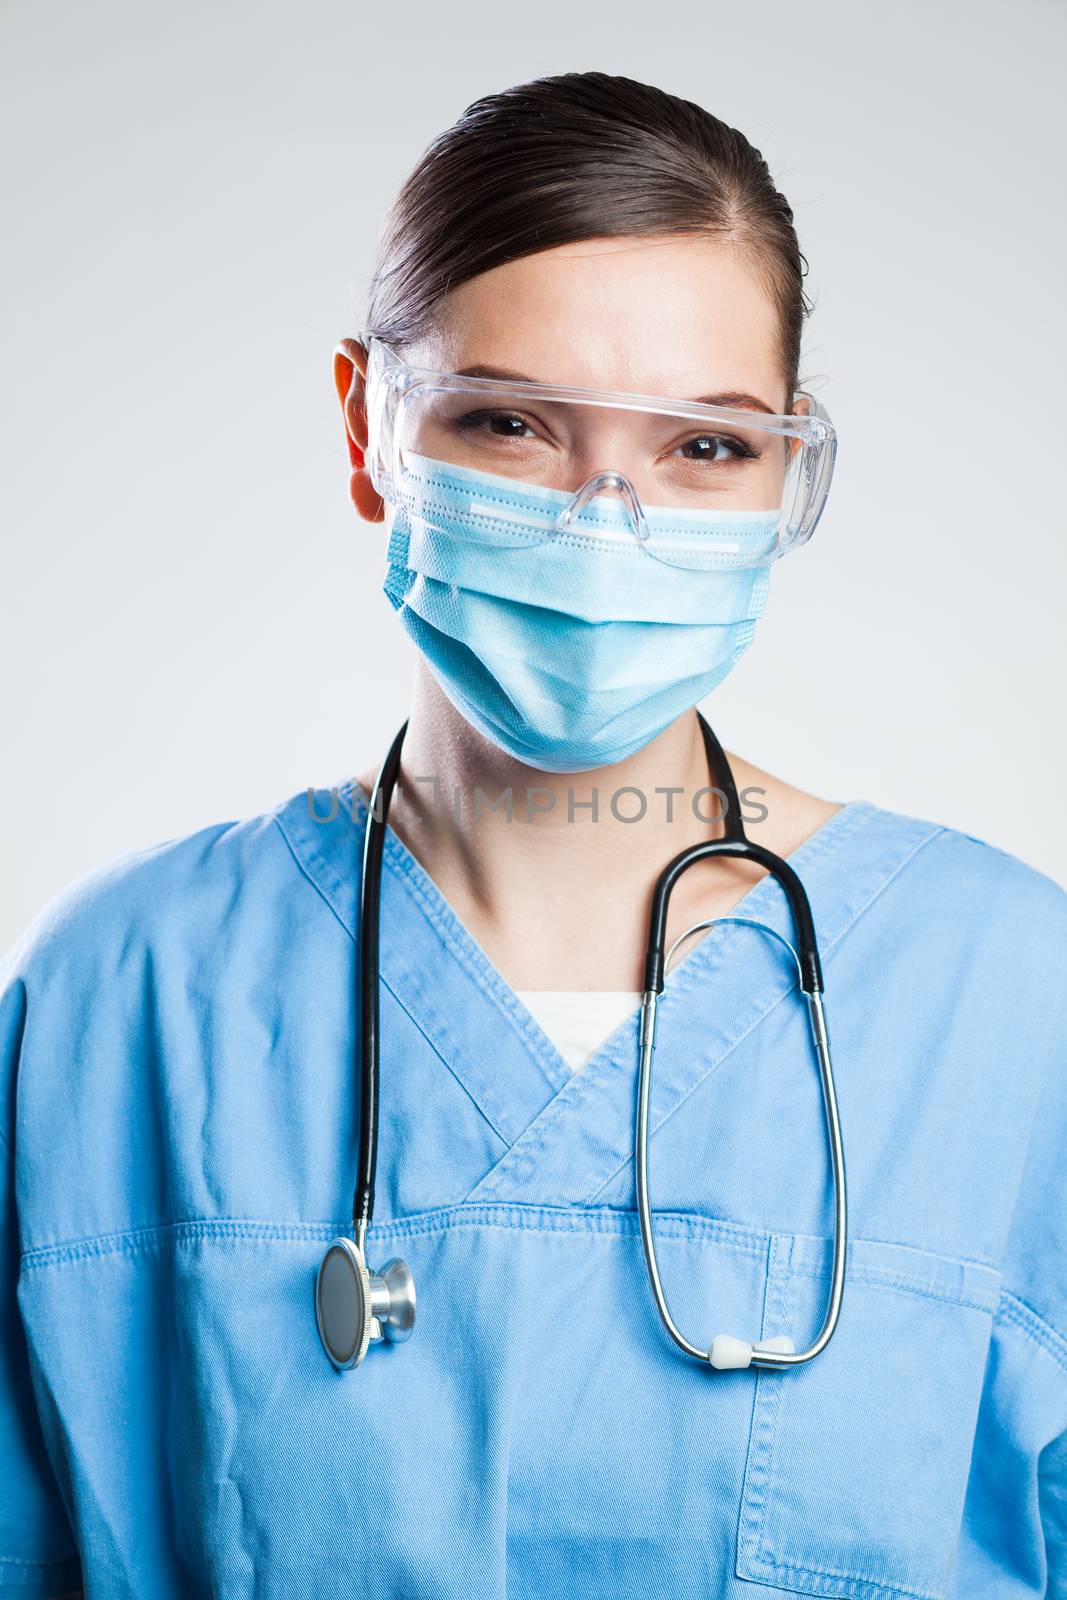 Happy satisfied female UK NHS doctor wearing protective face mask & safety goggles,eyes smiling,studio portrait isolated on white background,content relief after end of global COVID-19 pandemic crisis